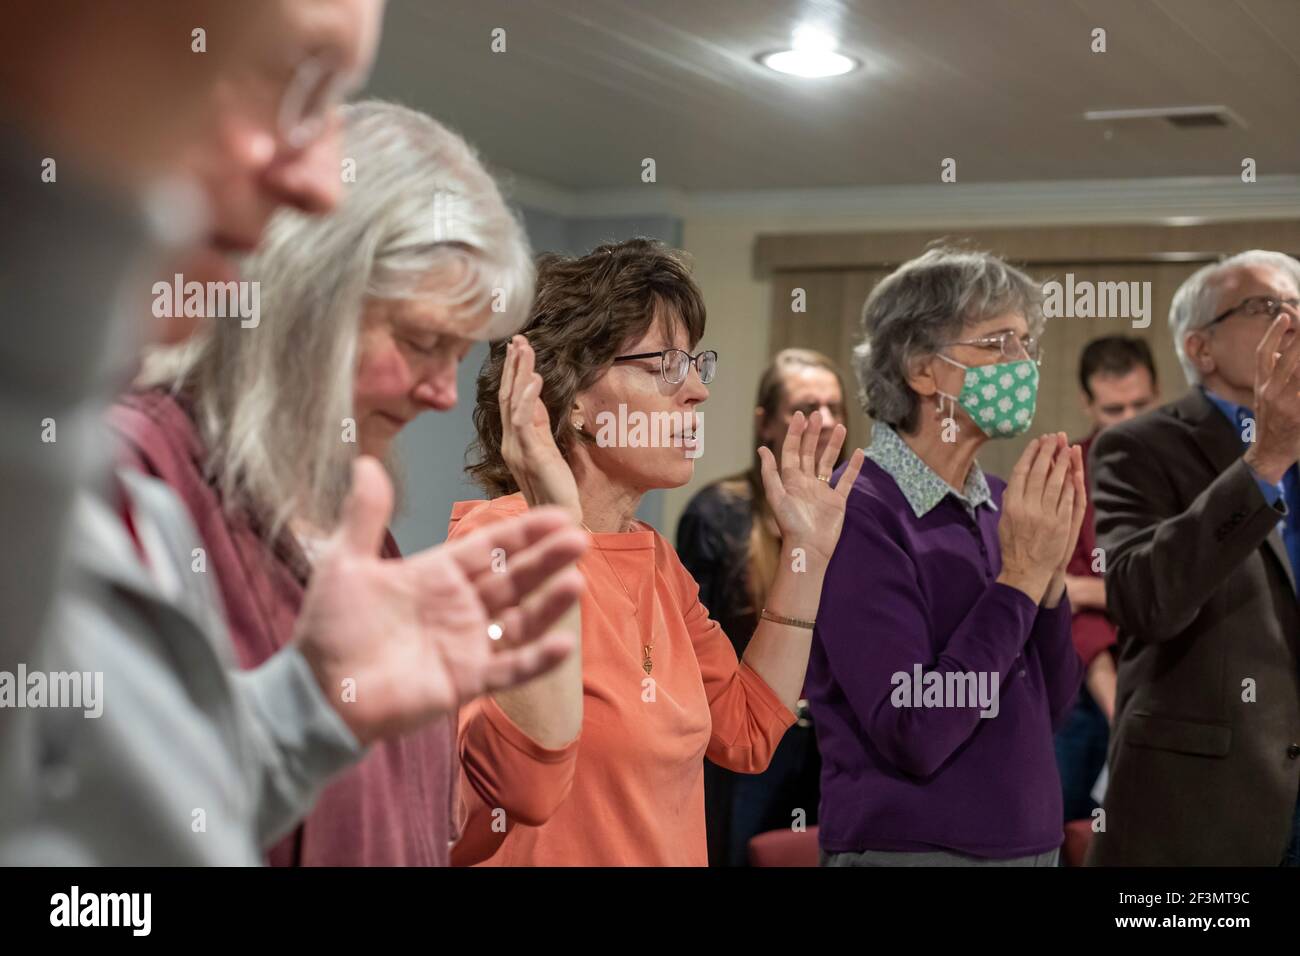 Ypsilanti, Michigan - Dr. Mary Healy (orange top) leads a Catholic prayer group at her home. Dr. Healy is professor of Sacred Scripture at Sacred Hear Stock Photo